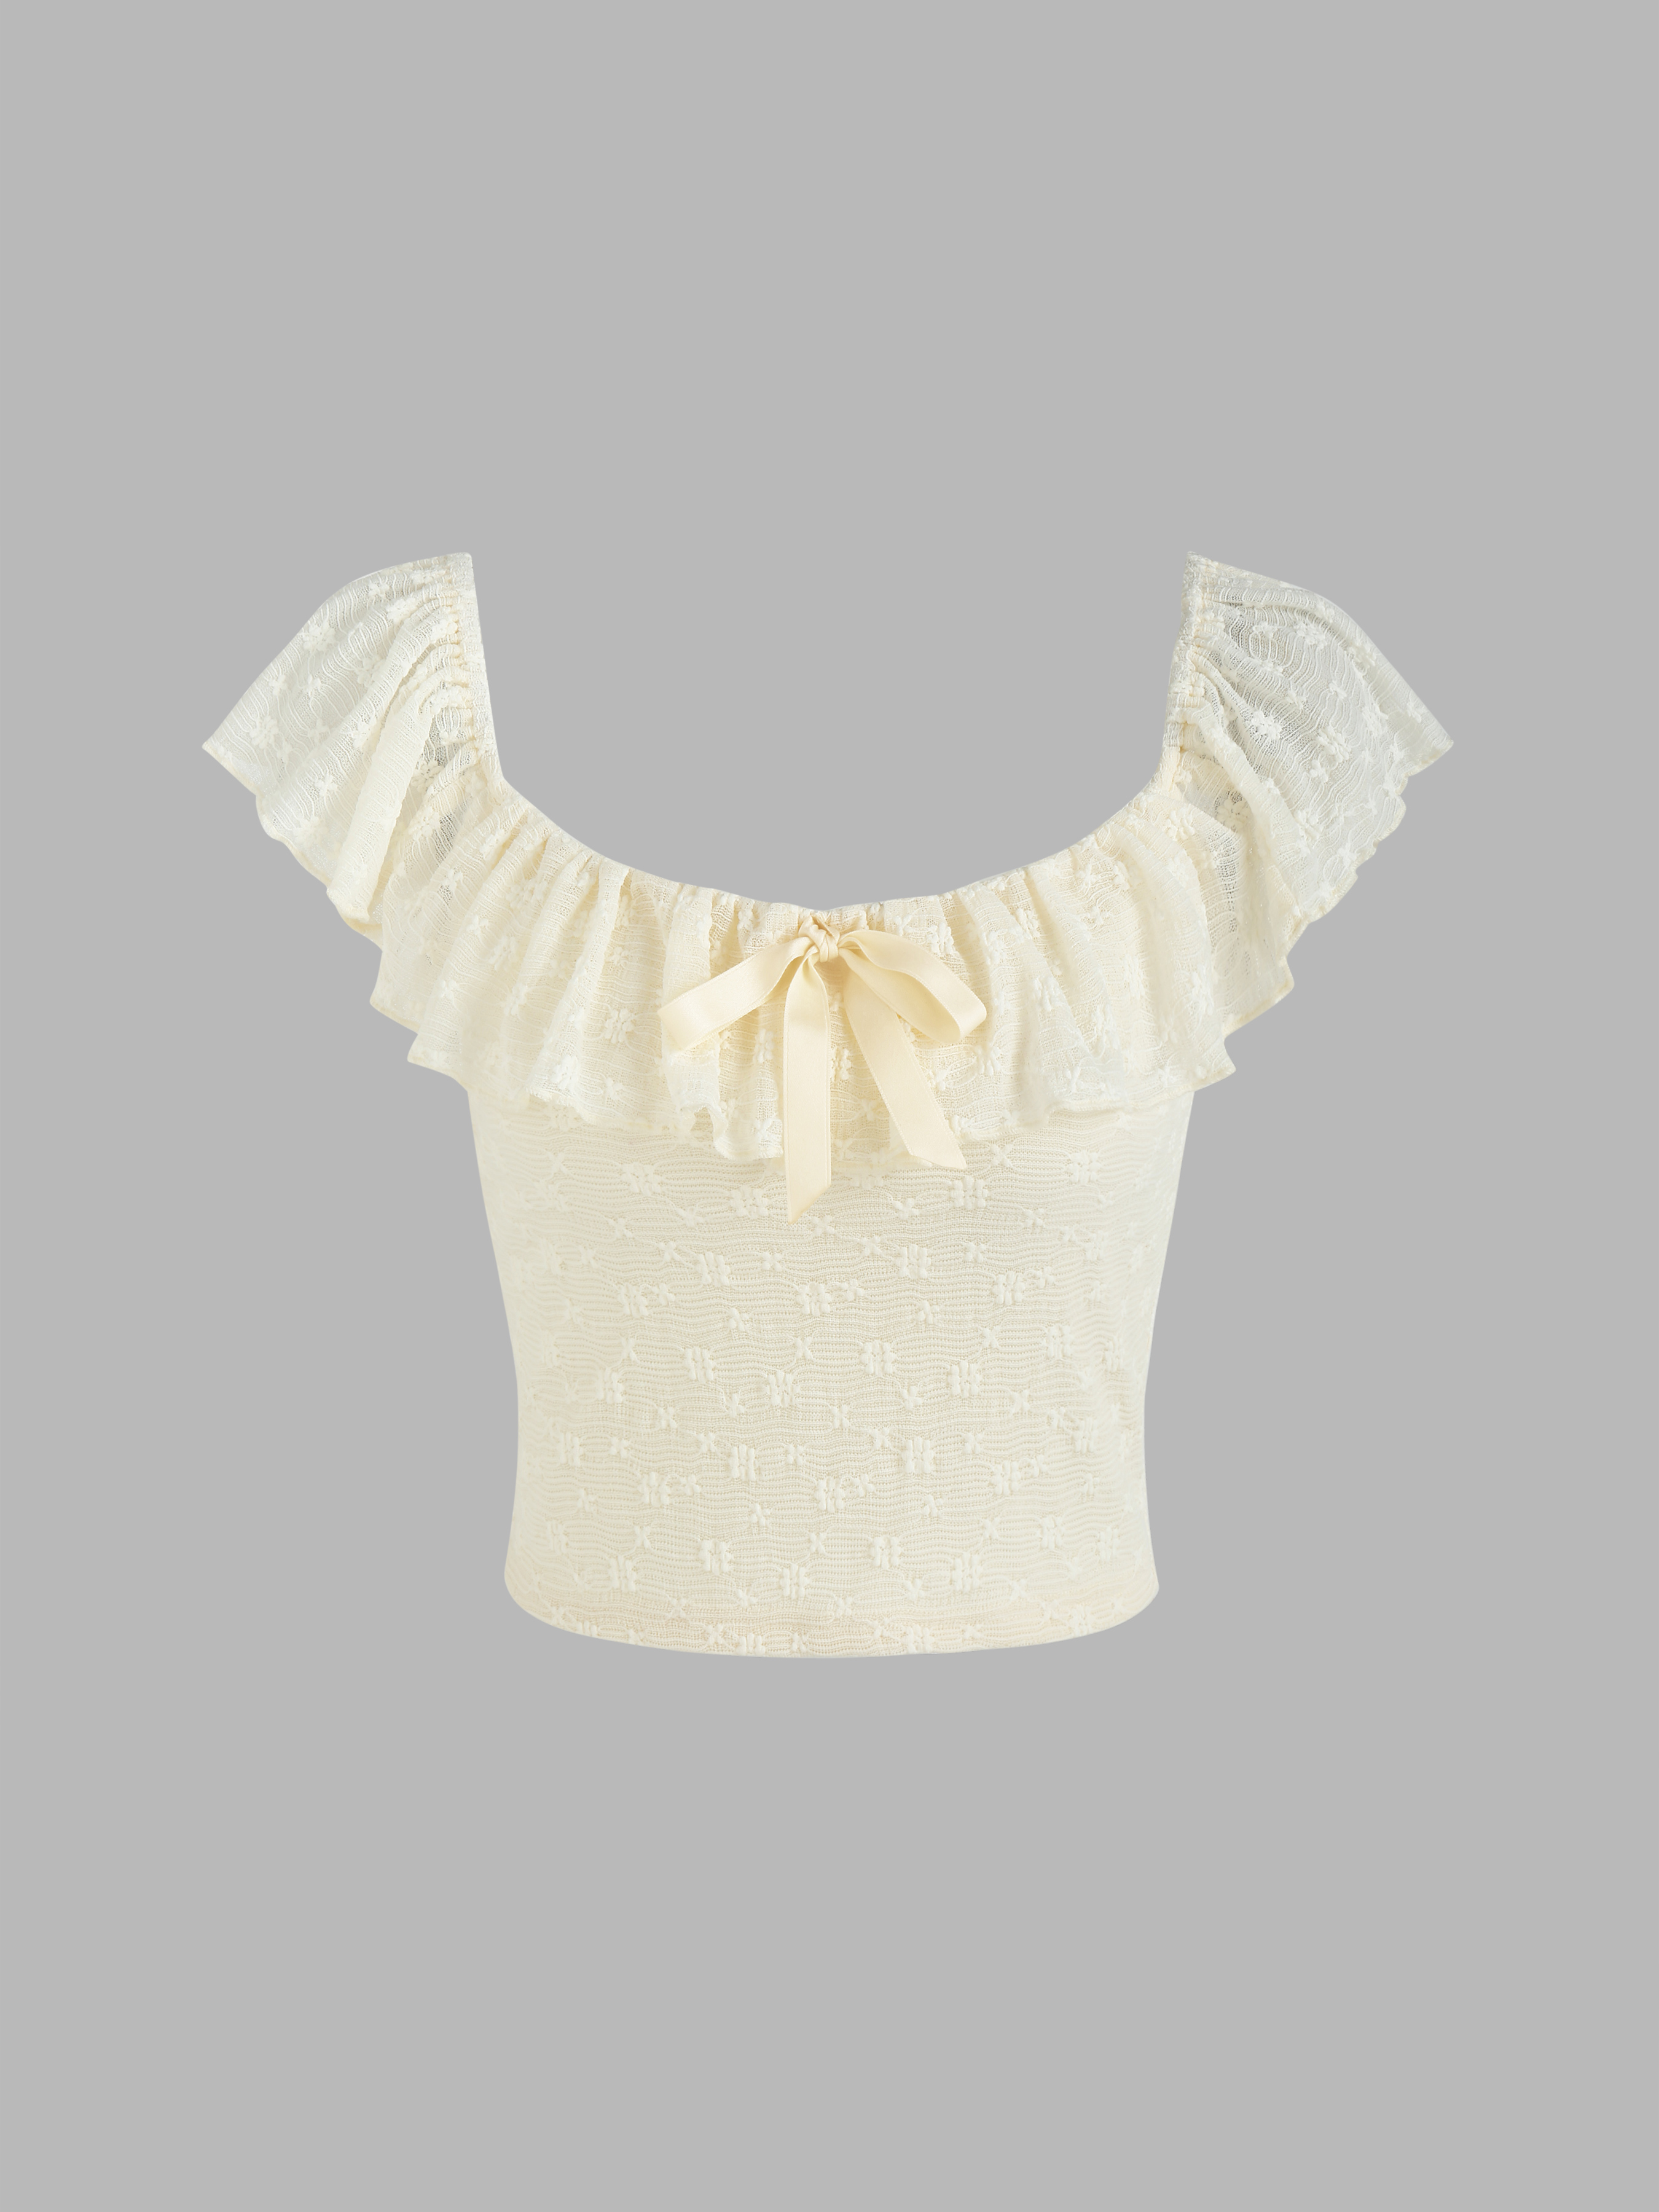 Ruffle Hem Floral Lace Knotted Crop Top - Cider